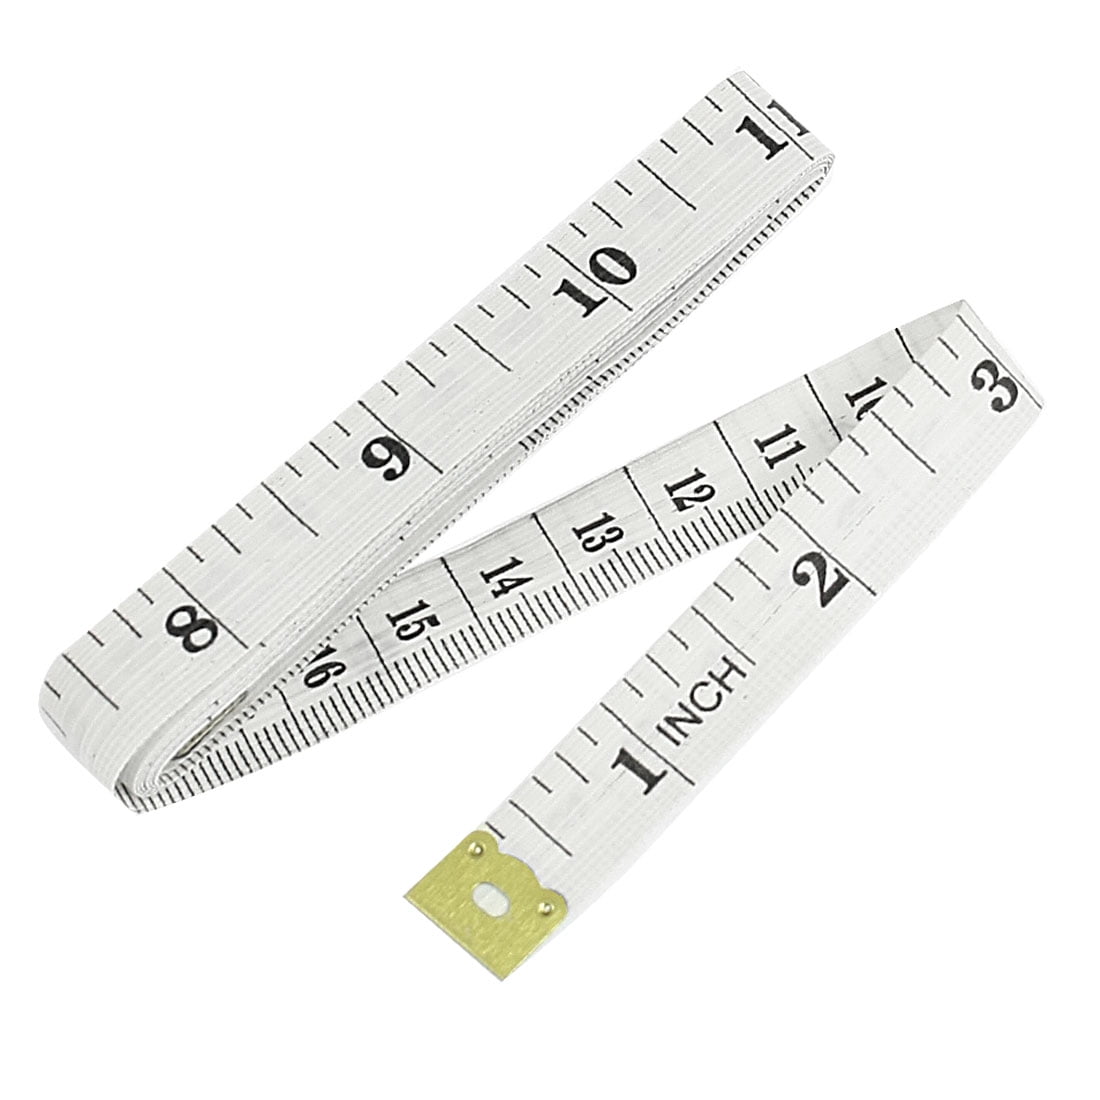 1x Soft Ruler Retractable Body Measuring Ruler Sewing Tape Tailor Cloth Mea Ne. 